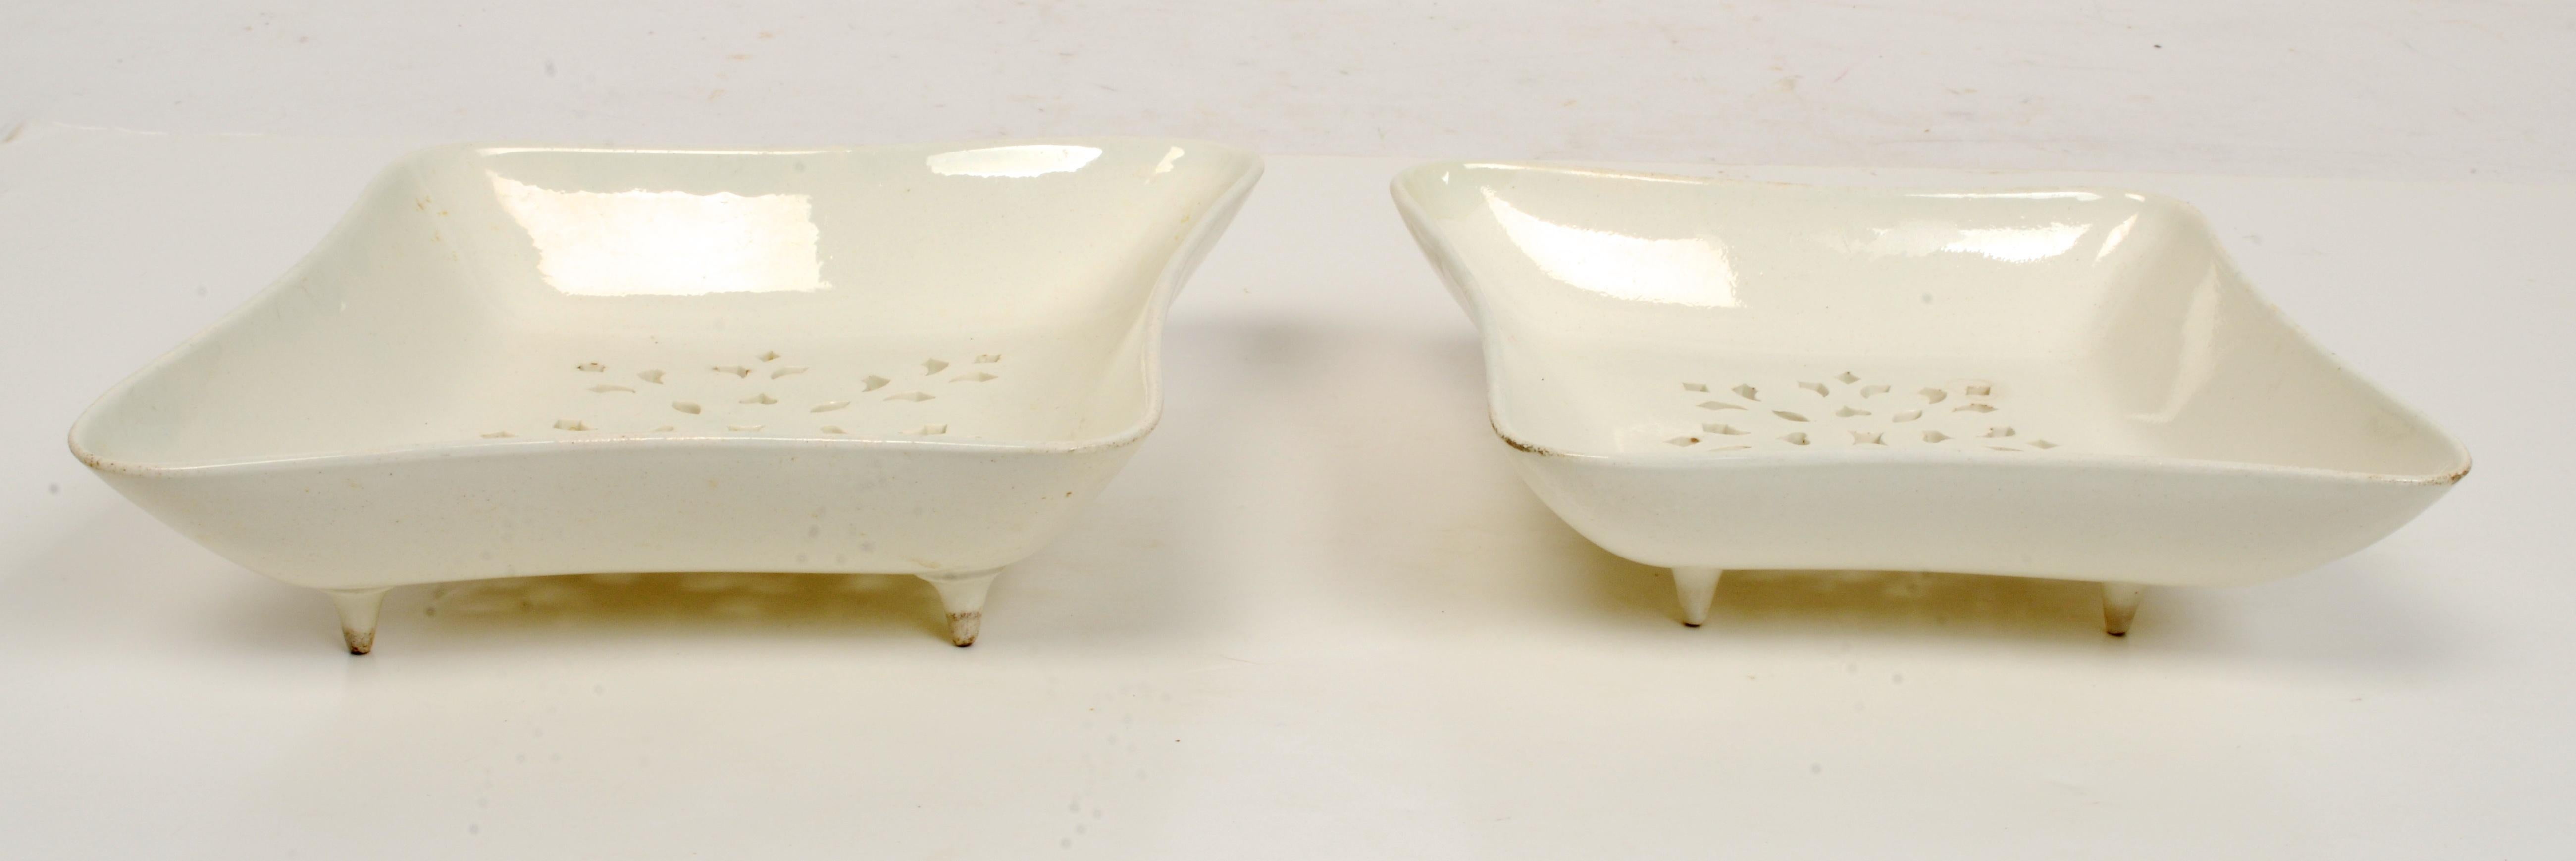 Assembled Pair of Wedgwood Cress or Strawberry Dishes, Late 18th C In Good Condition For Sale In valatie, NY